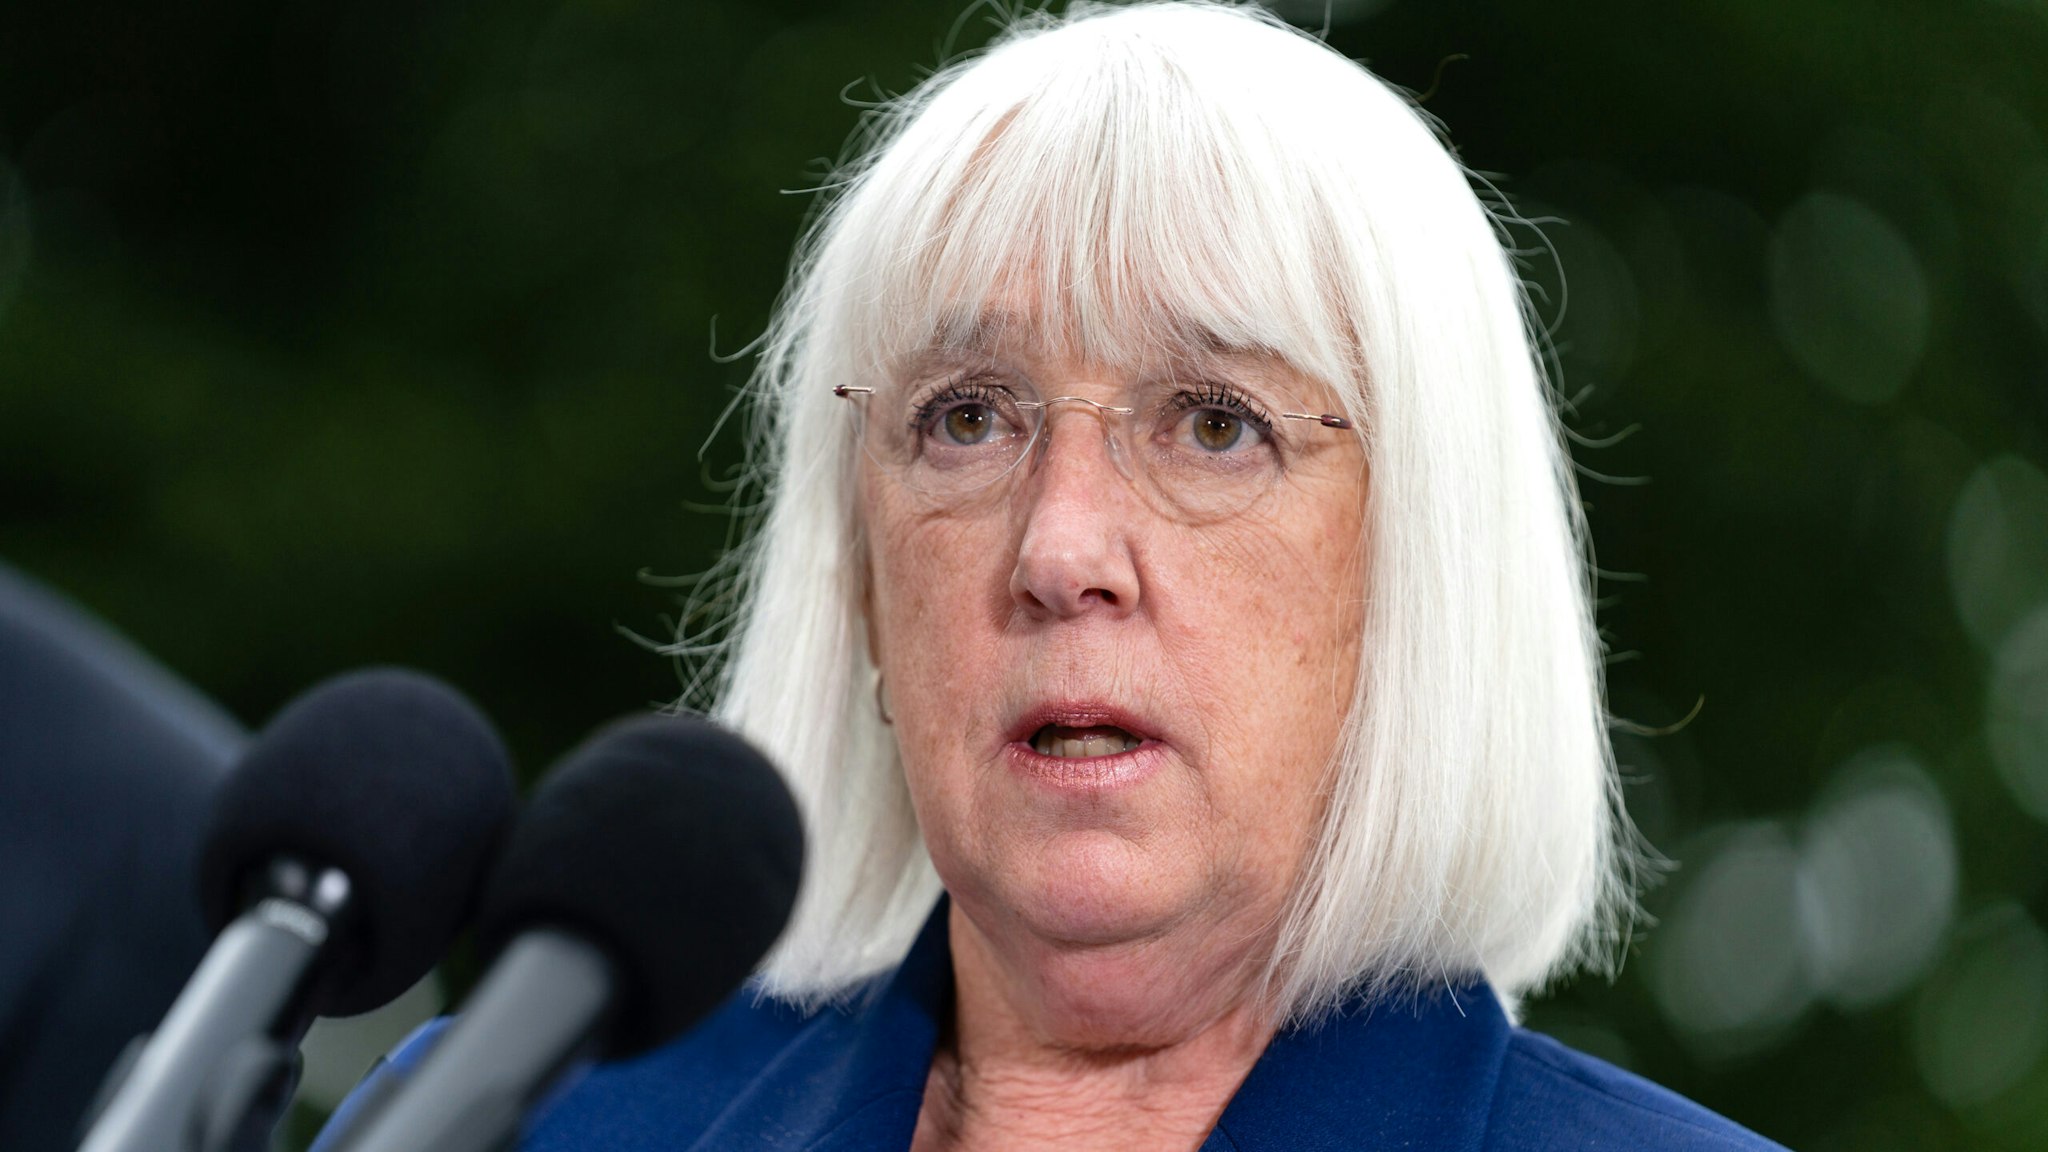 Senator Patty Murray, a Democrat from Washington, speaks during a news conference on the Right to Contraception Act outside the US Capitol in Washington, D.C., US, on Tuesday, July 26, 2022. The House passed legislation to codify access to contraception on Thursday, as Democrats sought to safeguard the right in response to the Supreme Courts ruling on Roe v. Wade.